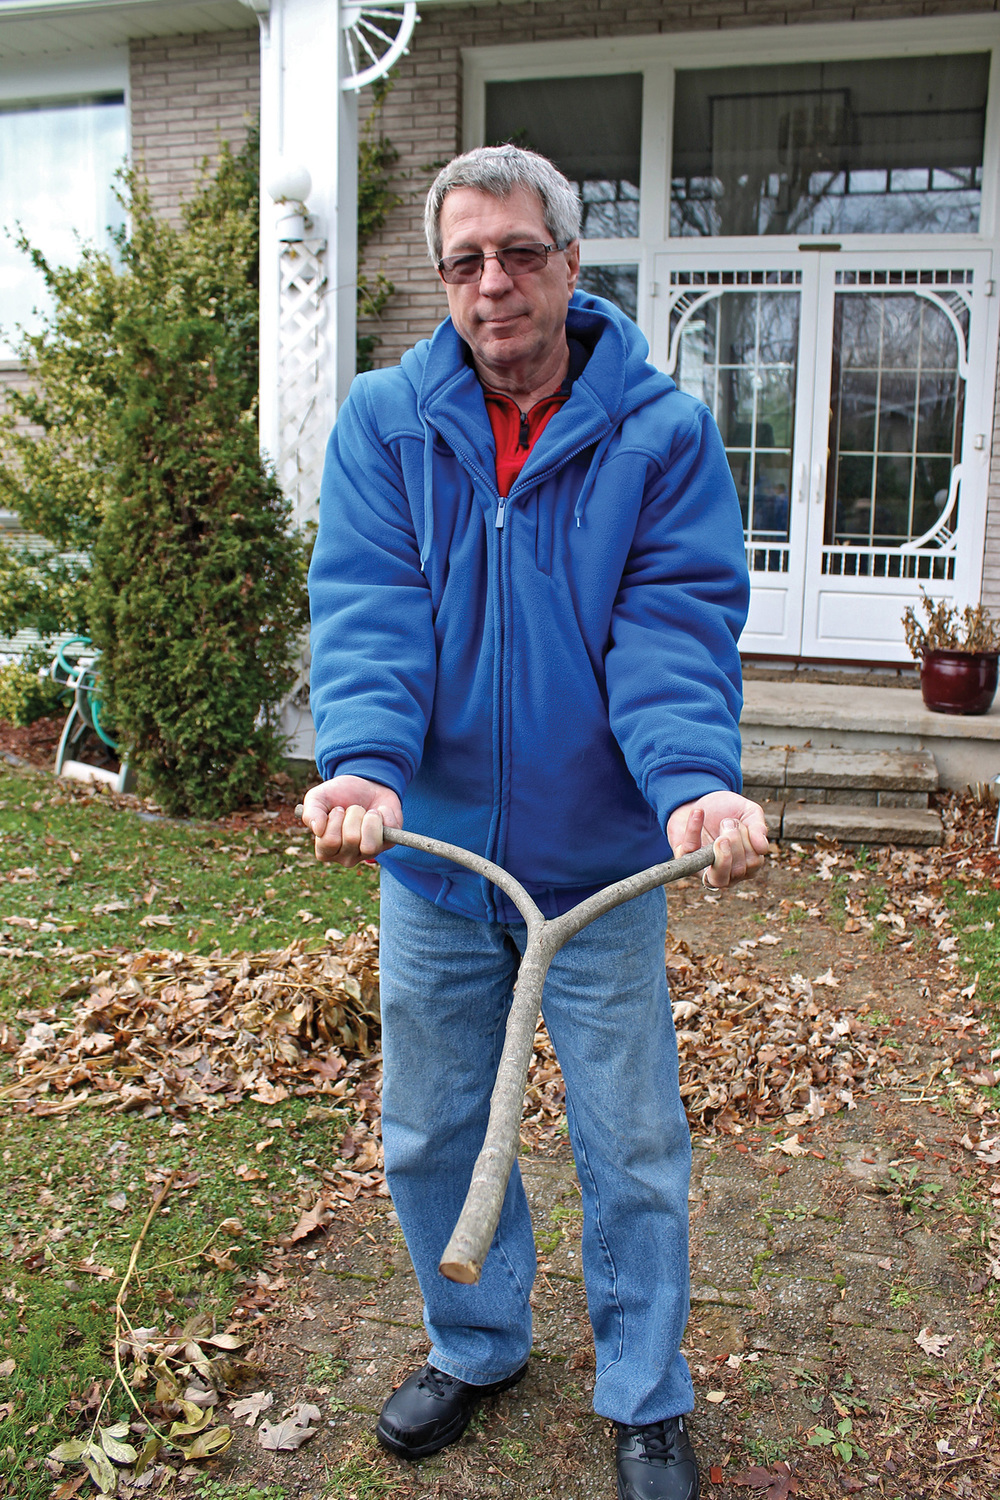 Marmora’s Doug Alcock was taught how to witch by his mother when he was 14 years old.